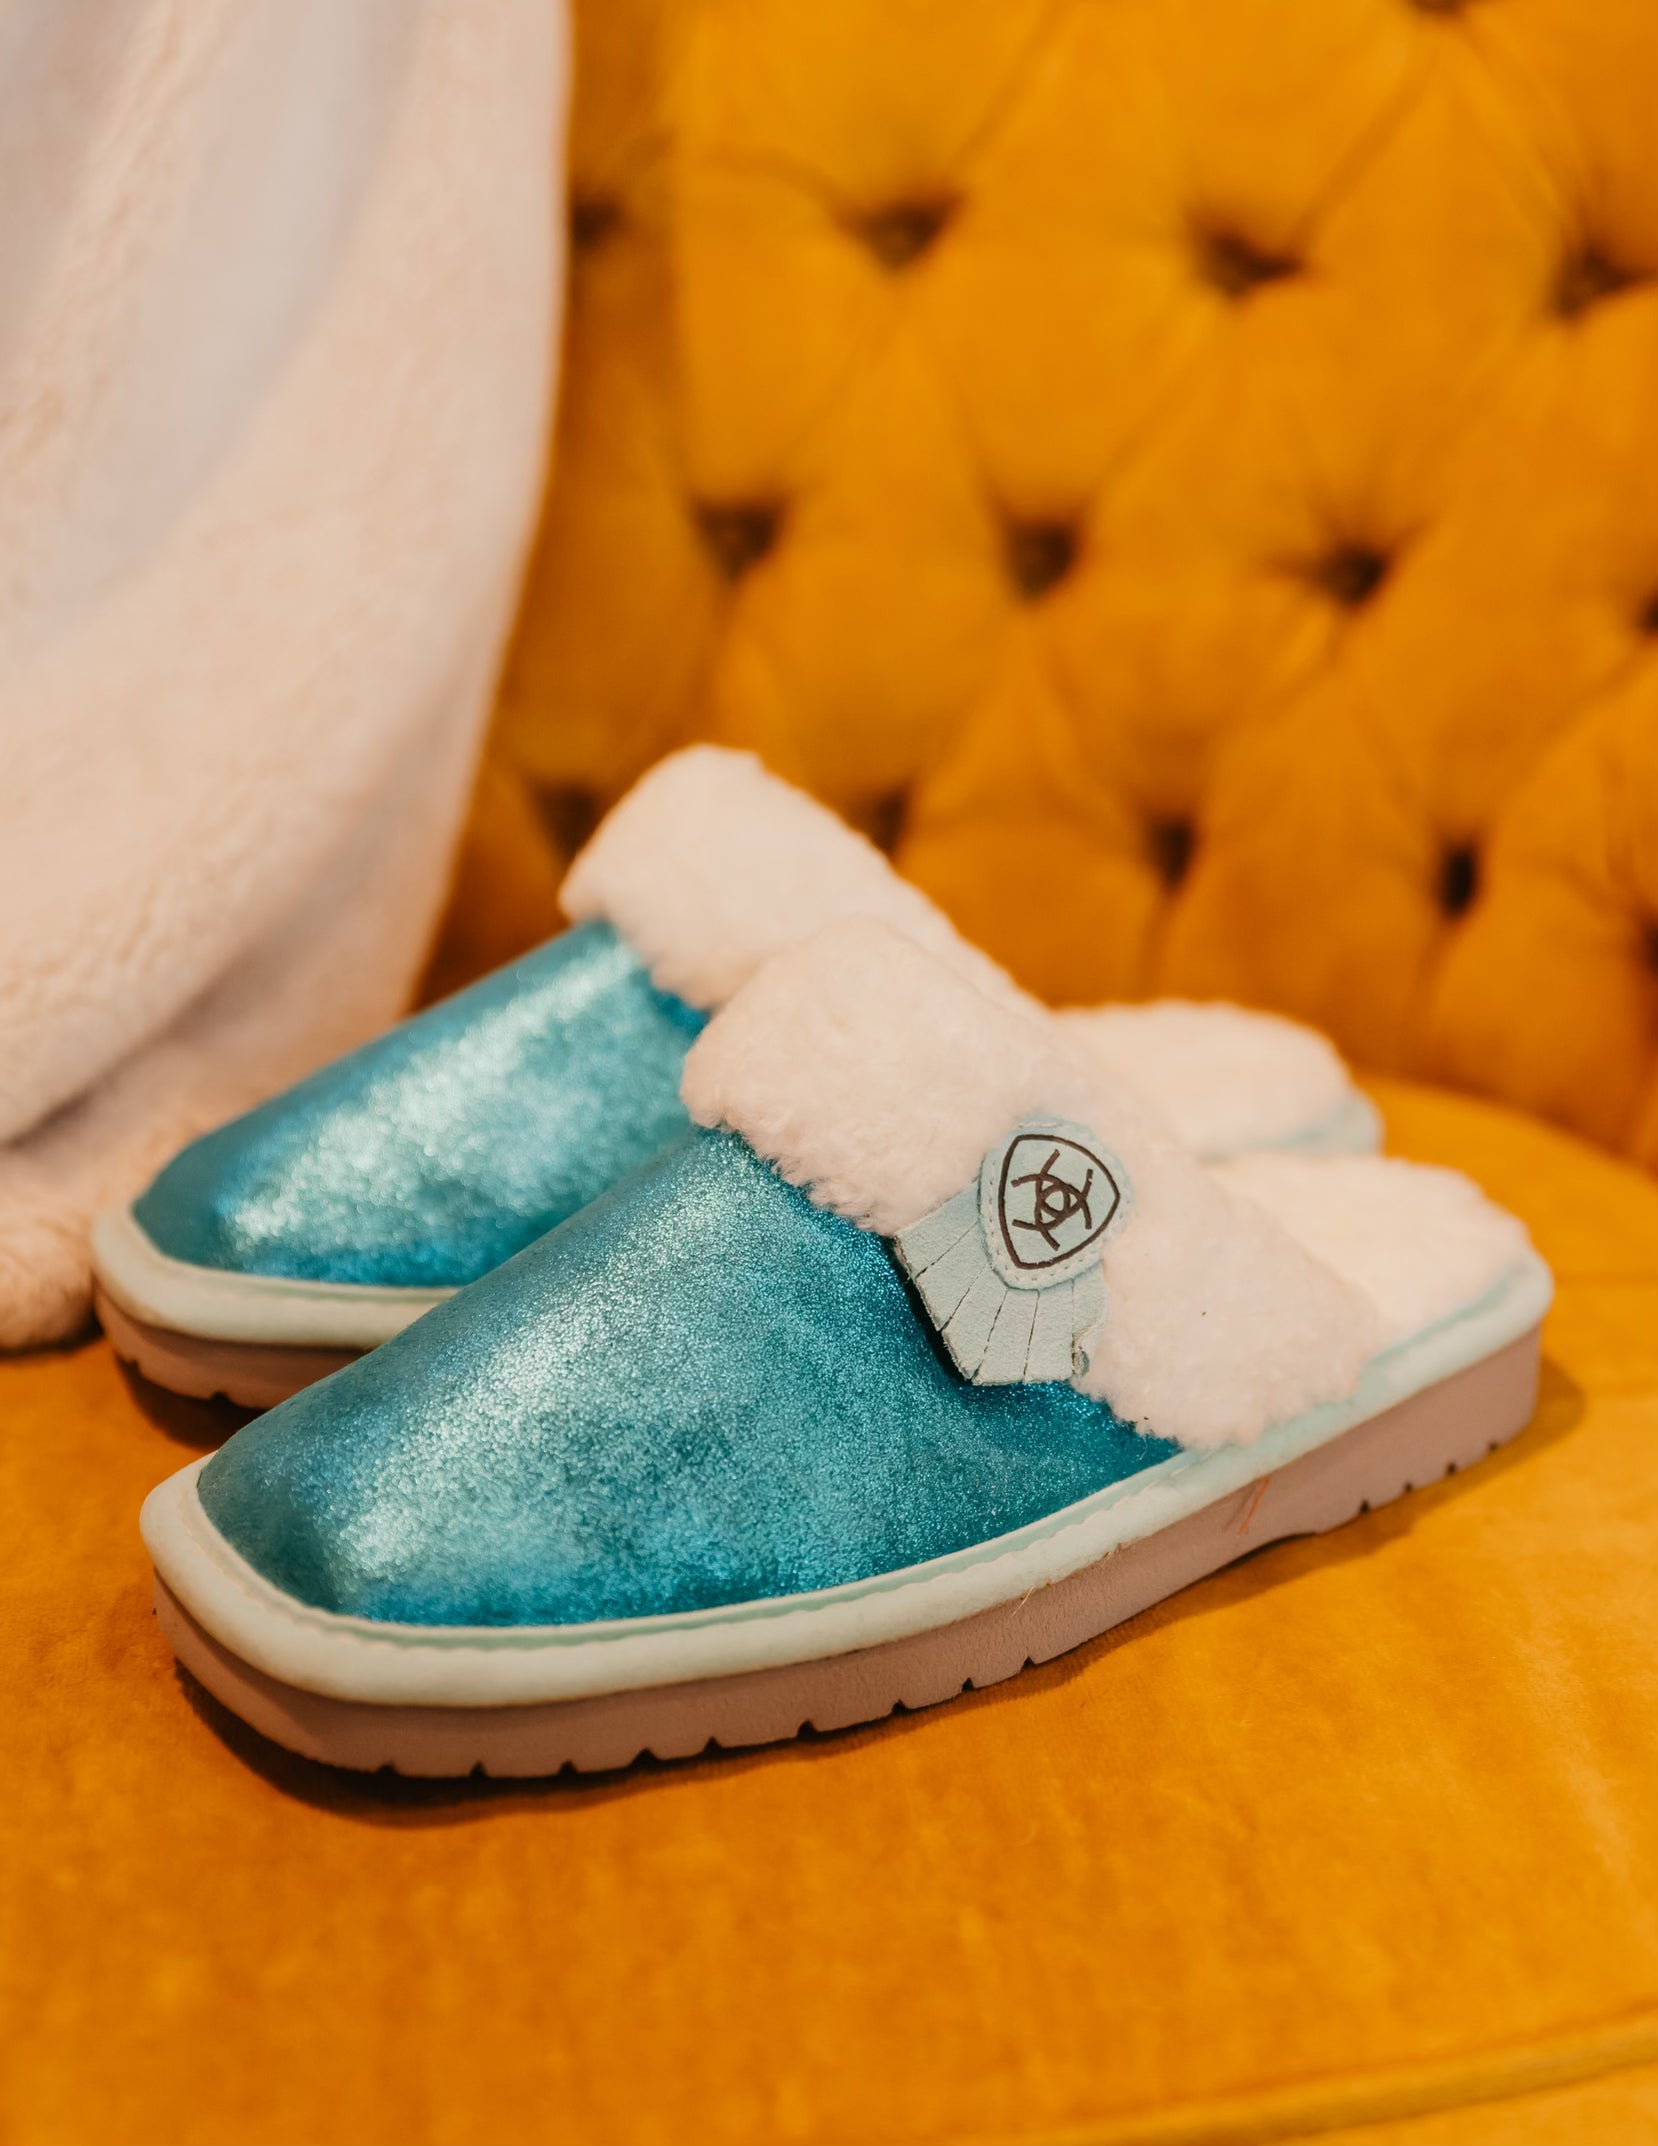 The Turquoise Slipper by ARIAT